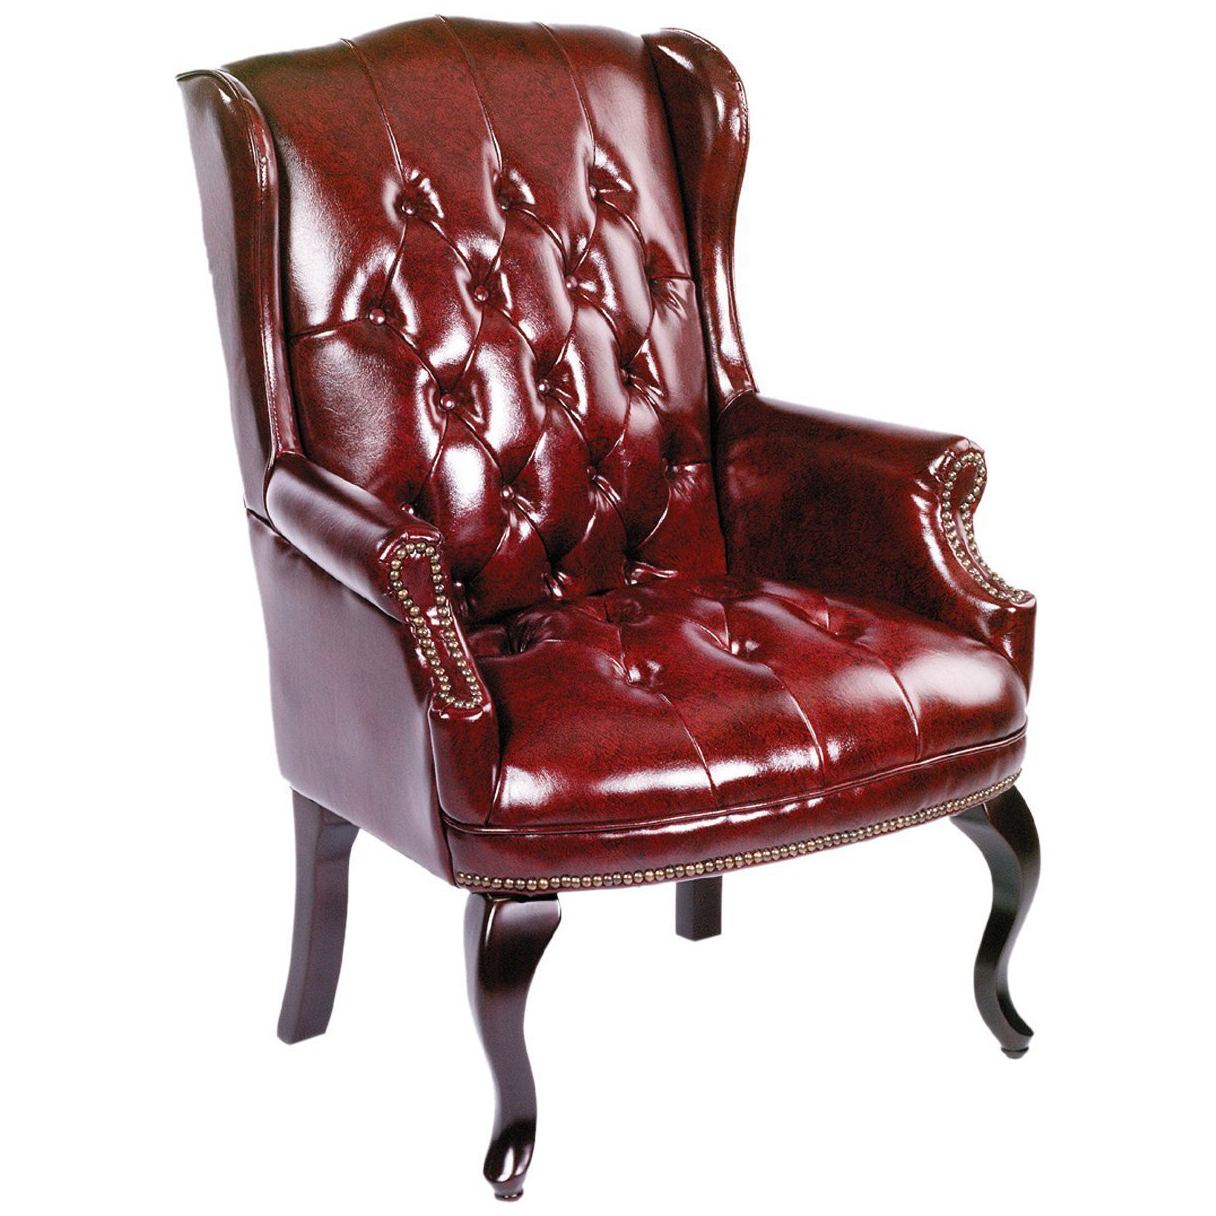 Boss Wingback Traditional Whiskey Chair.jpg